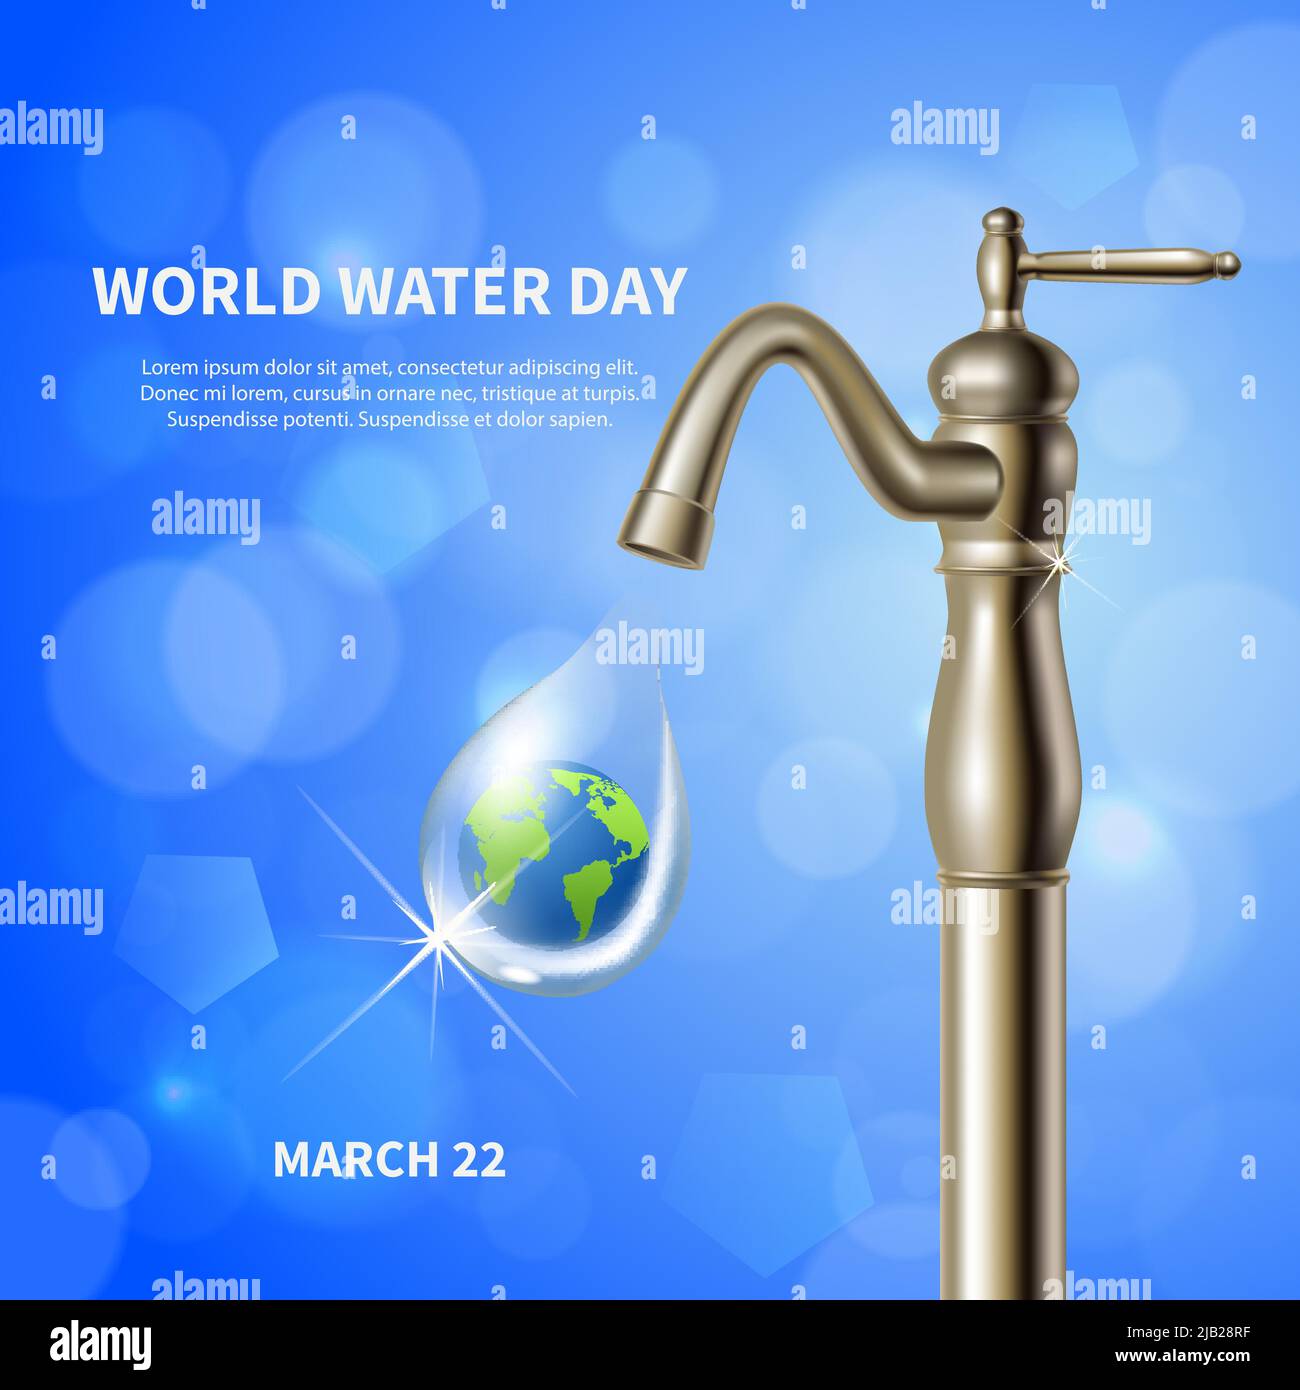 World water day advertising blue poster with water crane and green earth image in drop background realistic vector illustration Stock Vector